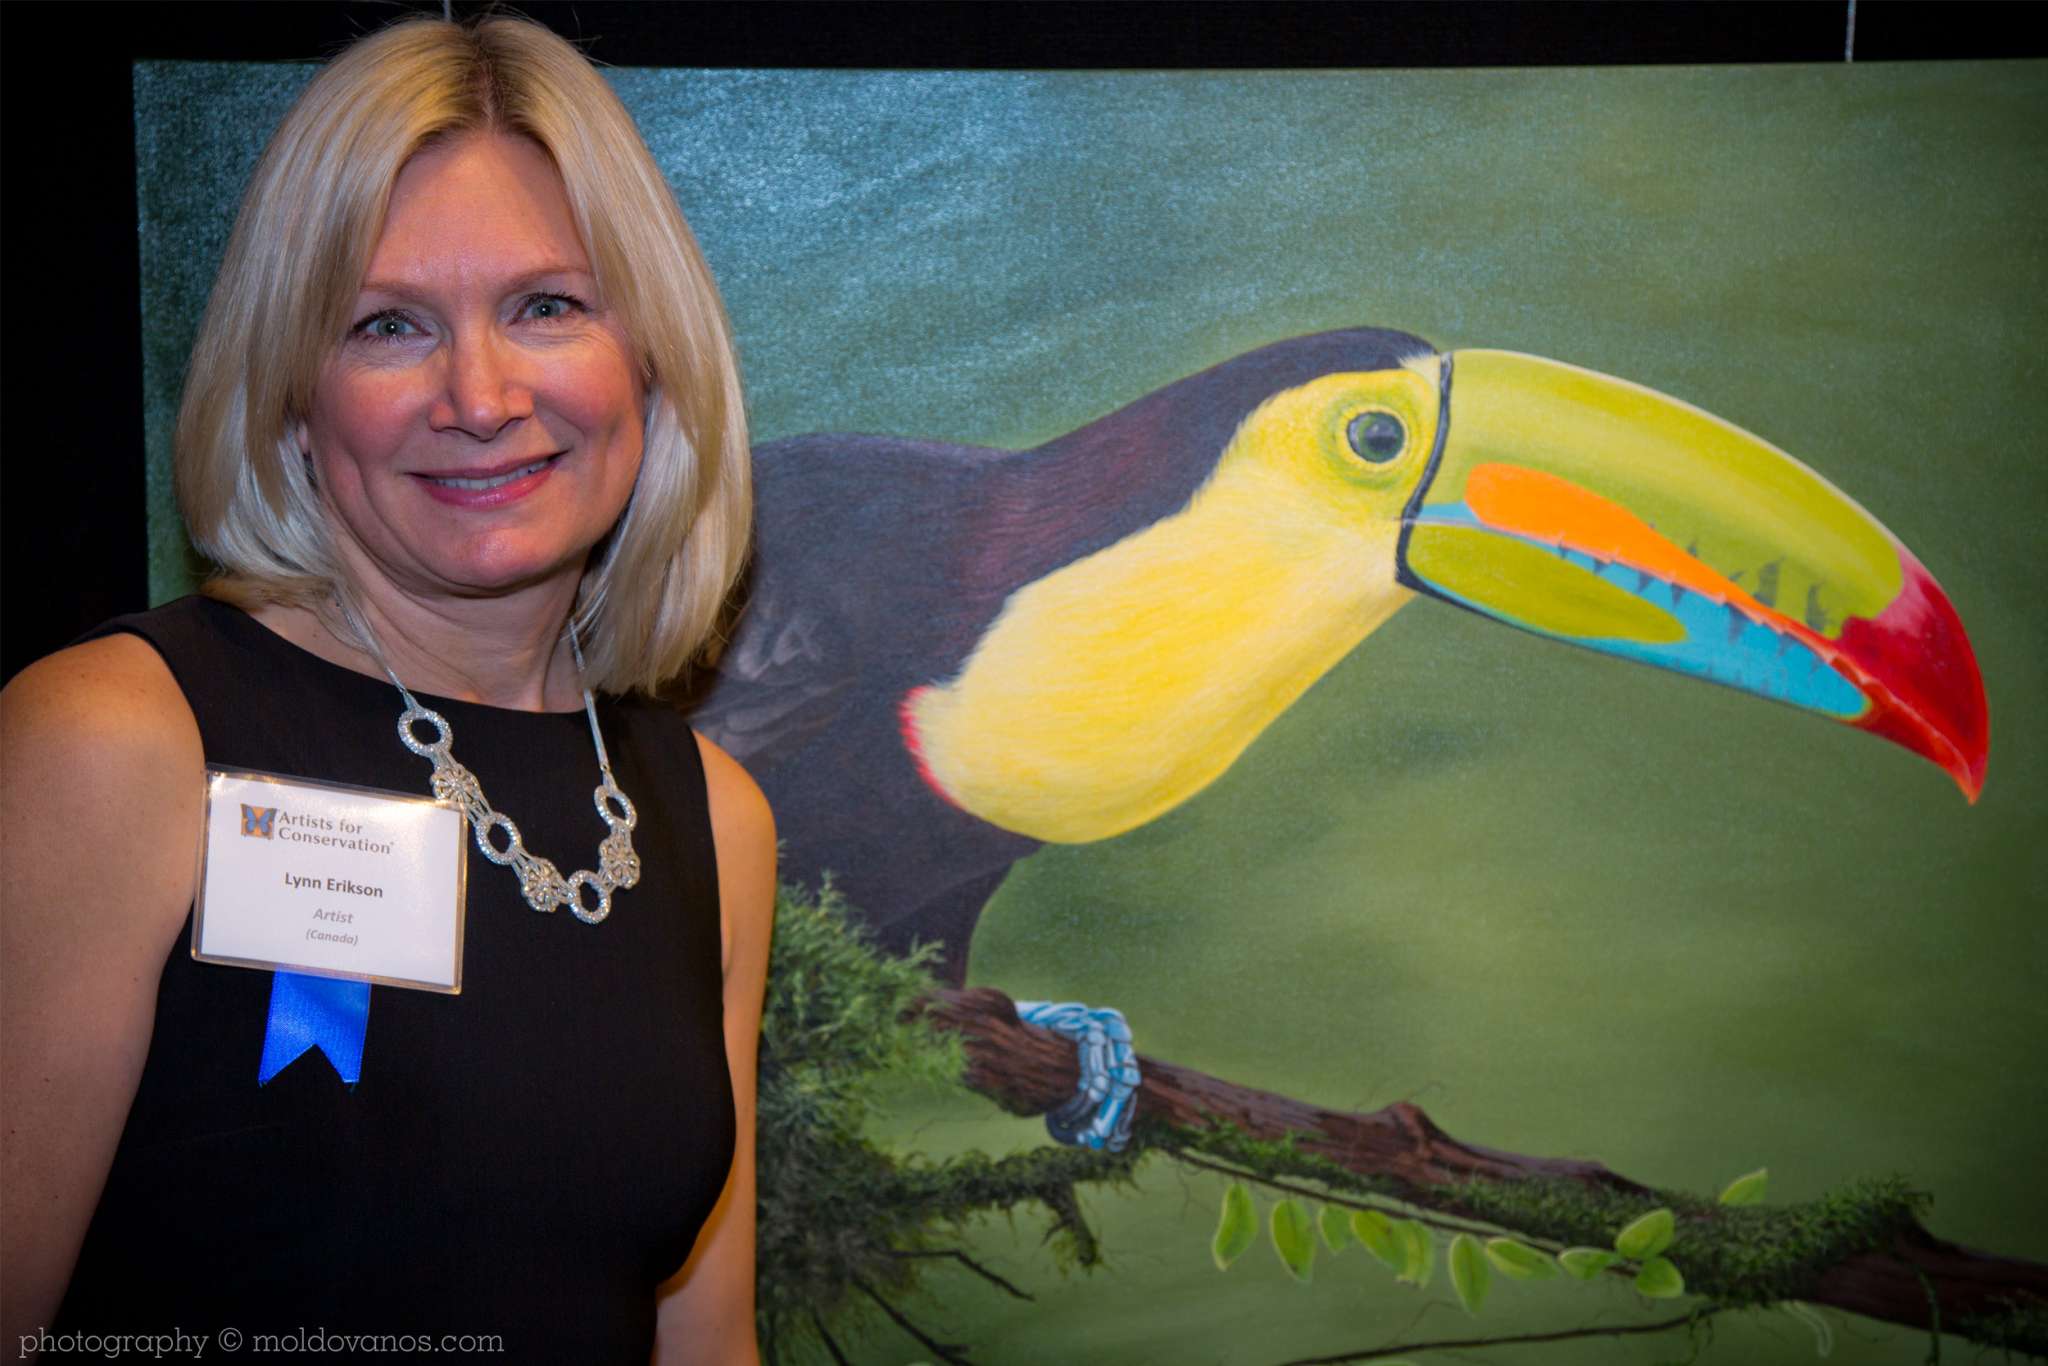 Artists for Conservation 27th International Ornithological Congress- Event Photography by Paul Moldovanos © moldovanos.com